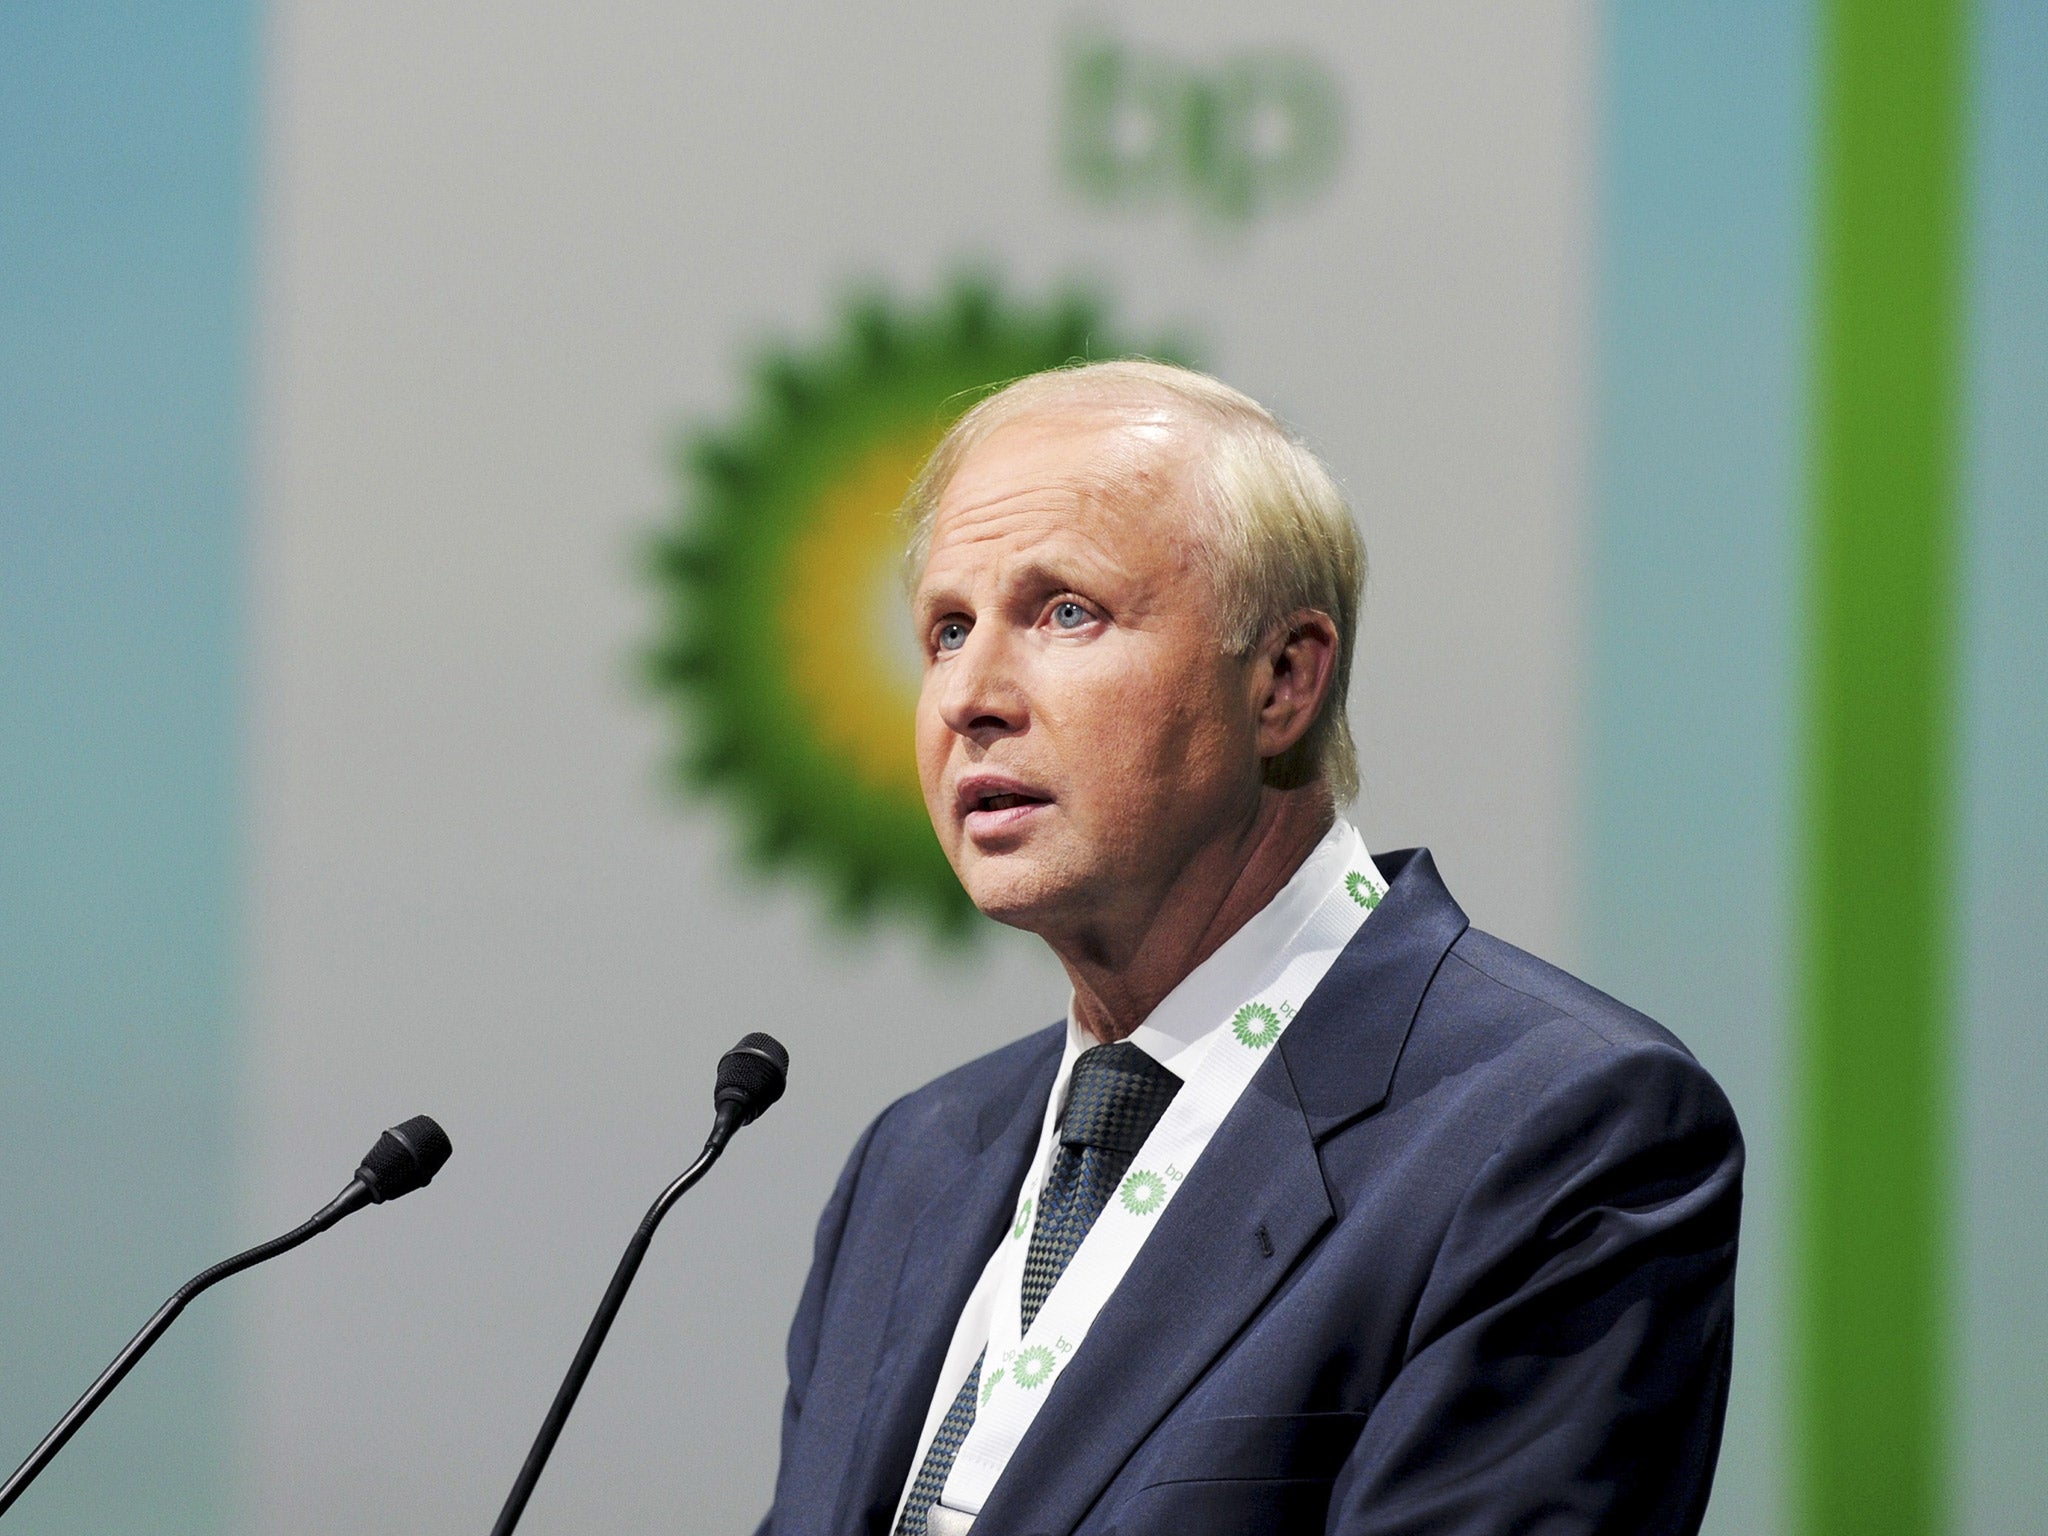 Bob Dudley's pay deal has angered many BP investors